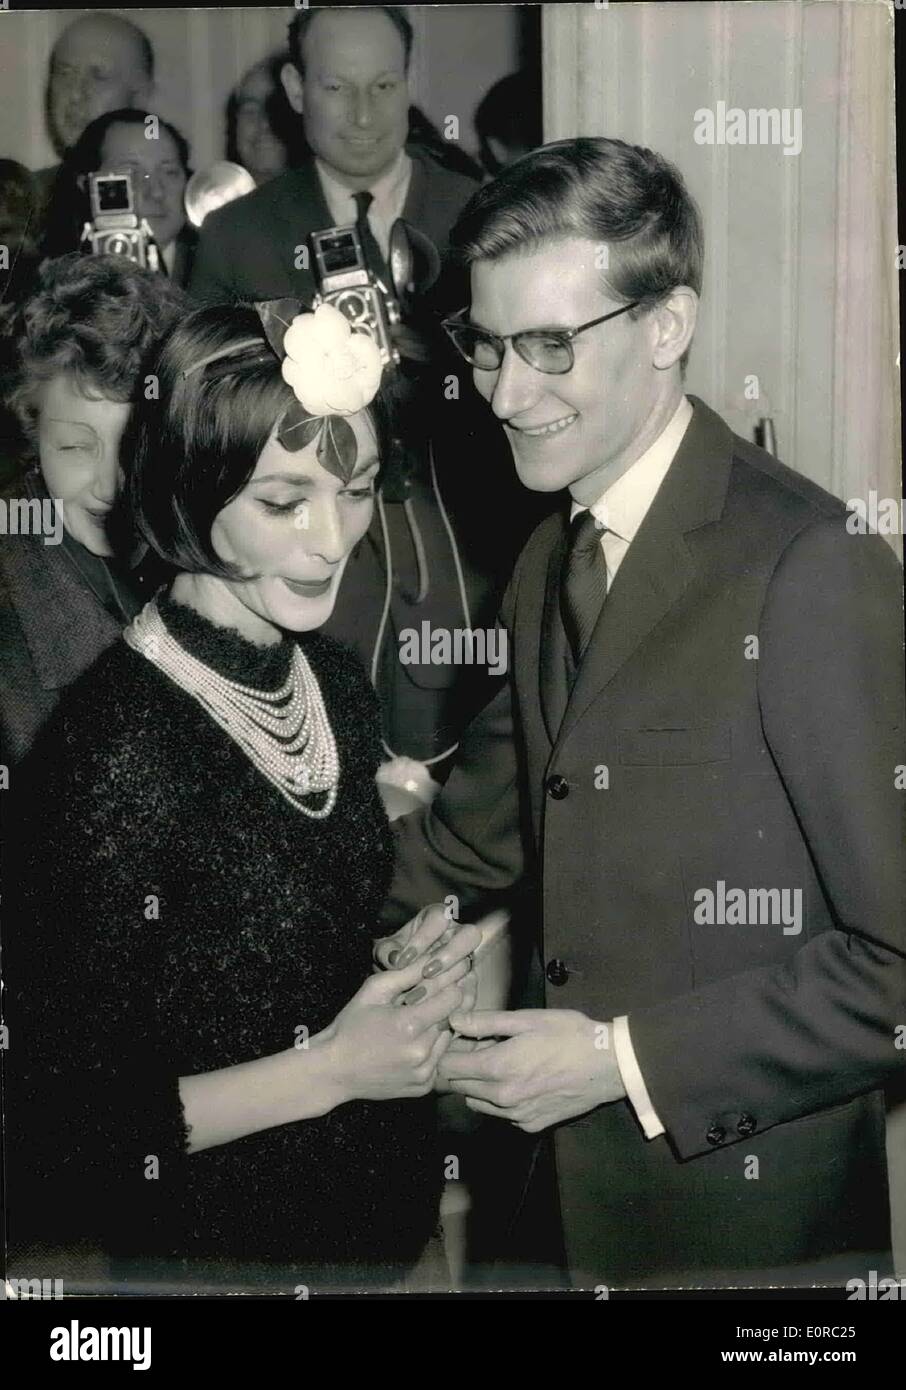 Jan. 01, 1959 - Paris Fashion Openings: Yves Saint-Laurent Presented his  new collection at Dior's this morning. Like the previous ones, this  collection was very successful. Phot Shows The new and main